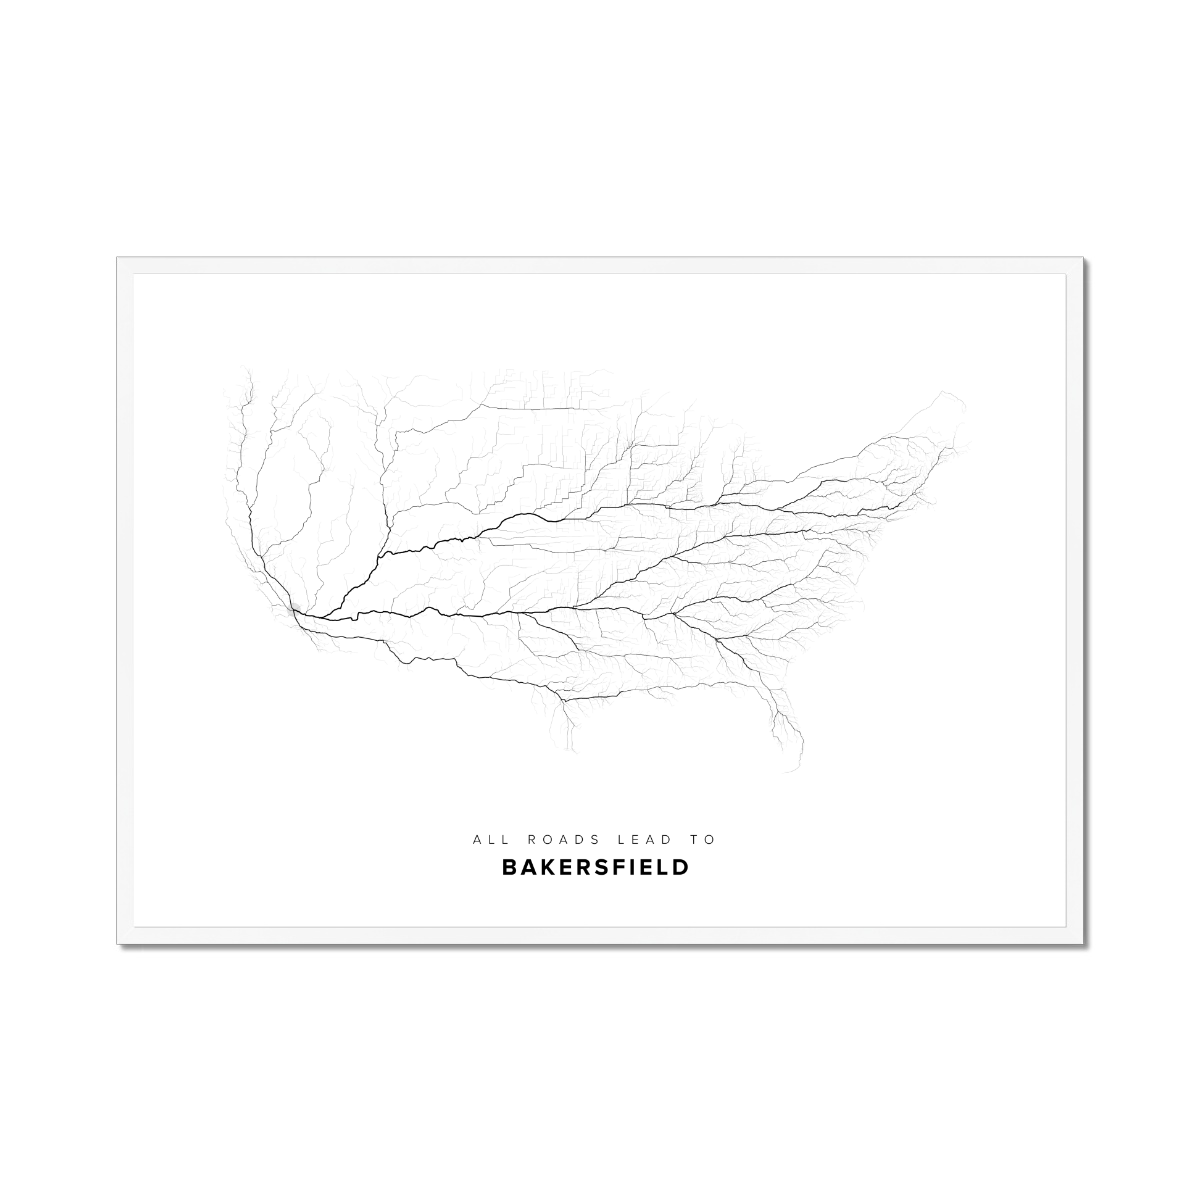 All roads lead to Bakersfield (United States of America) Fine Art Map Print